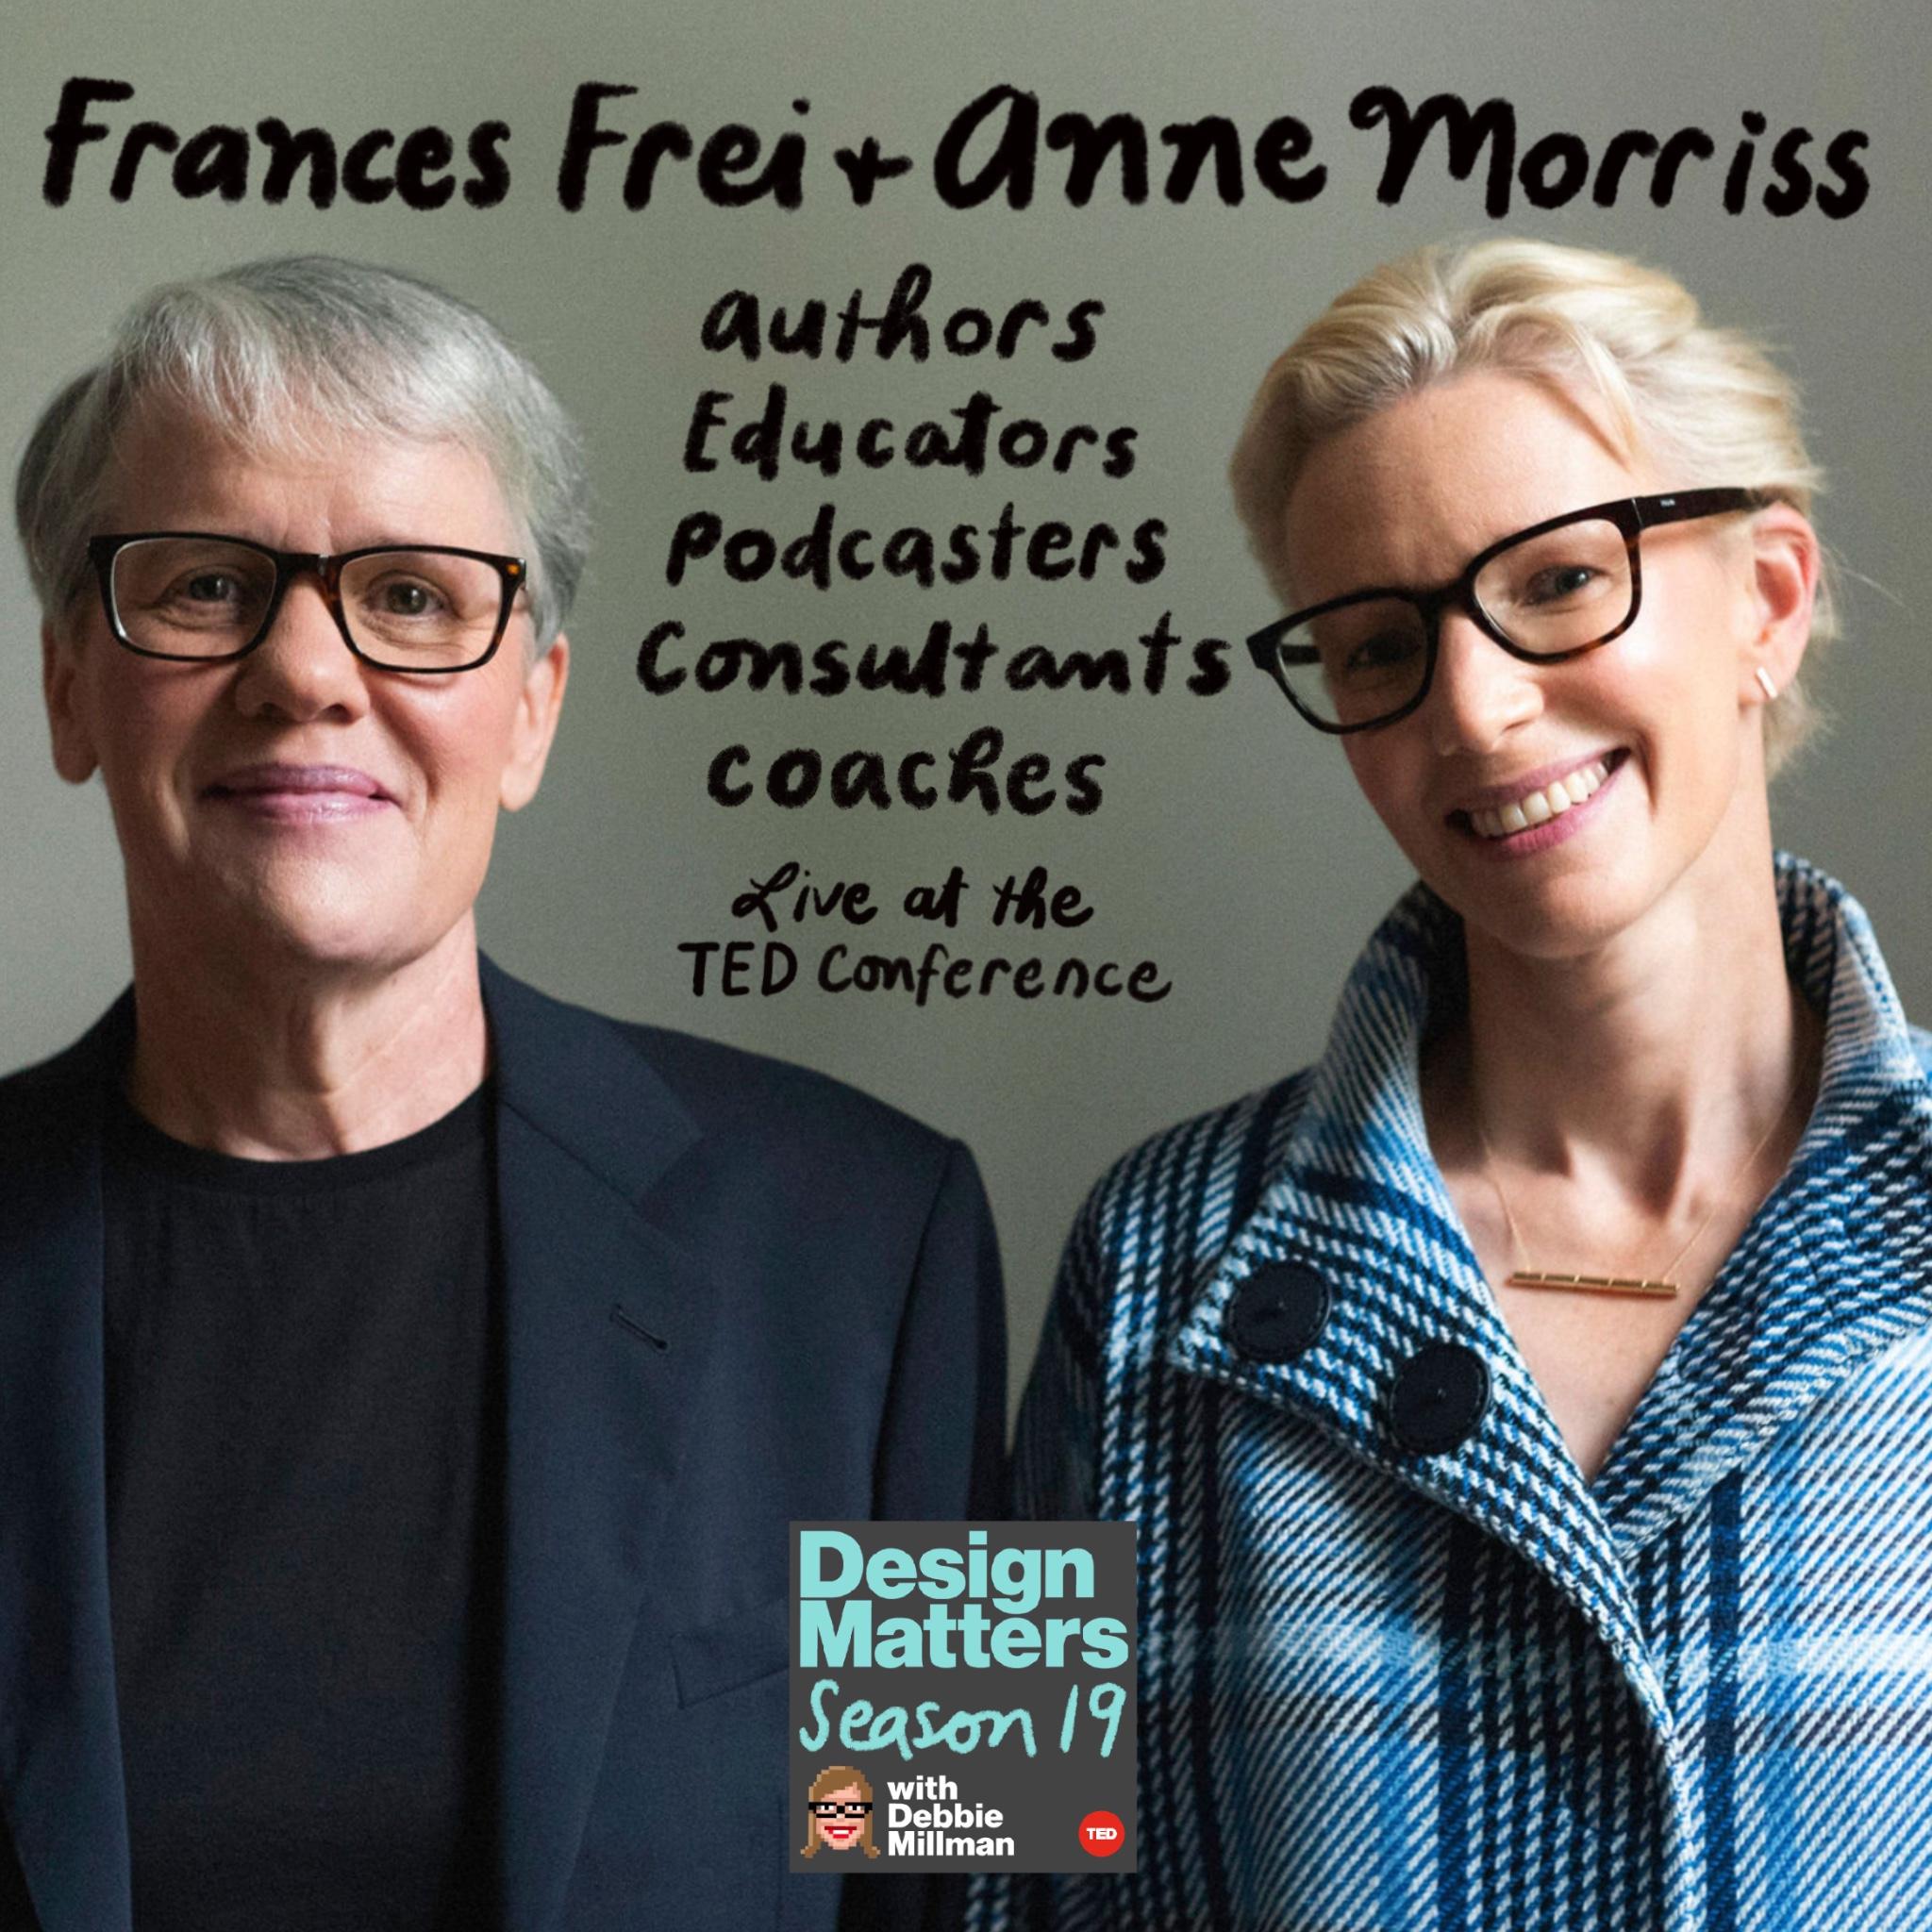 Thumbnail for "Anne Morriss and Frances Frei ".